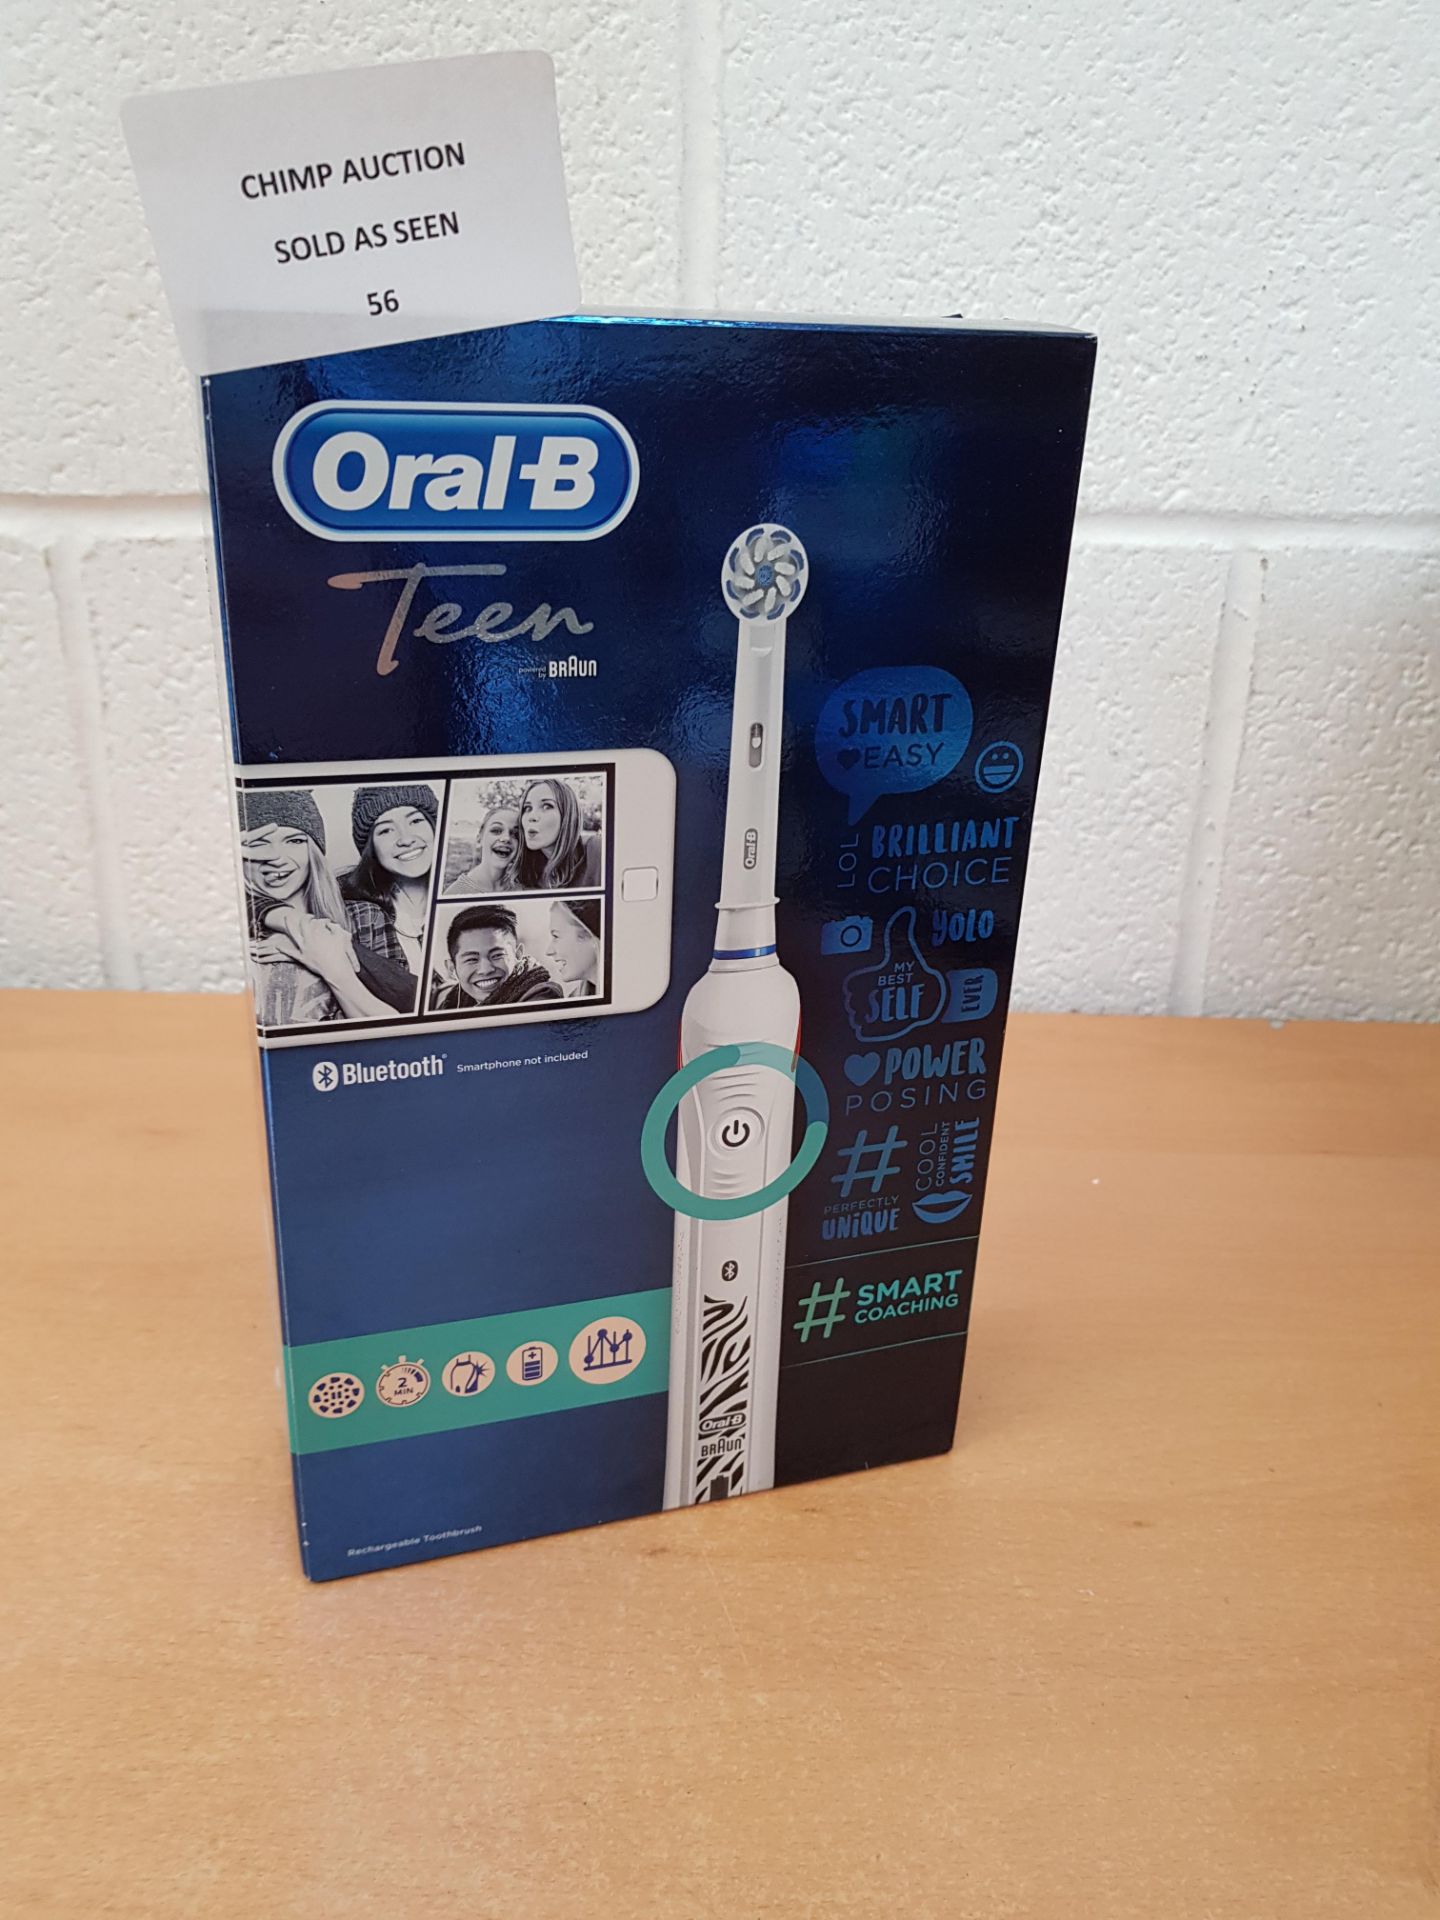 Oral-B Braun Teen White Bluetooth Electric Rechargeable Toothbrush RRP £79.99.